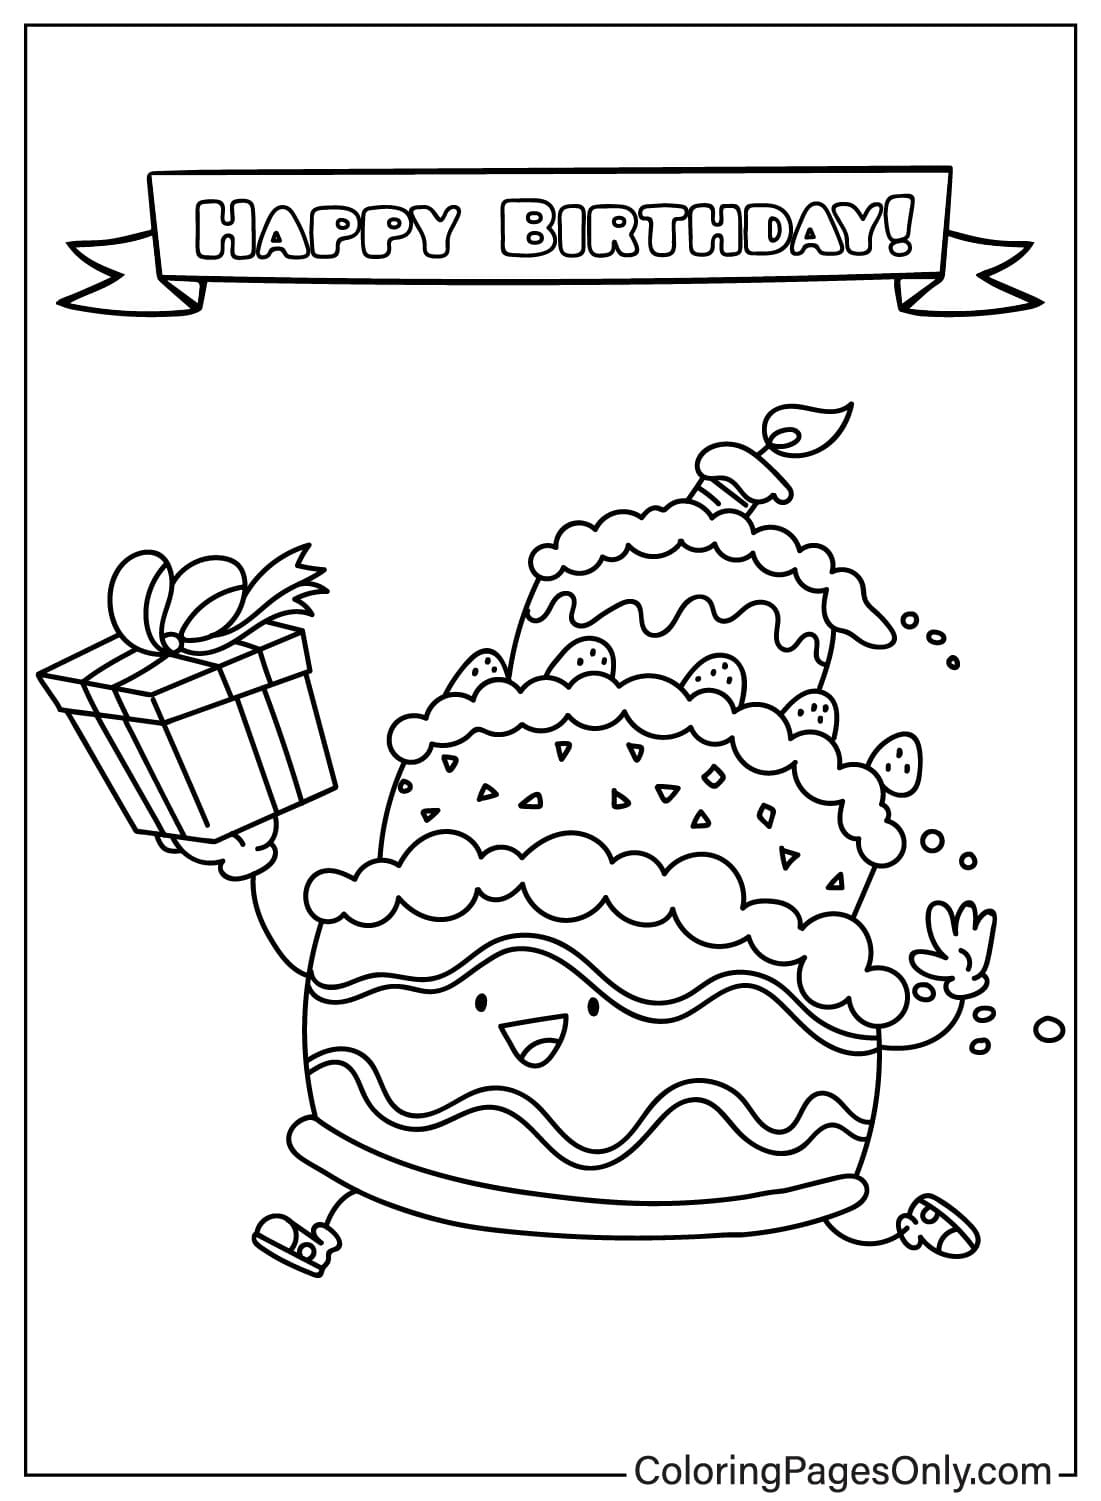 Birthday Cake Cute Coloring Page - Free Printable Coloring Pages